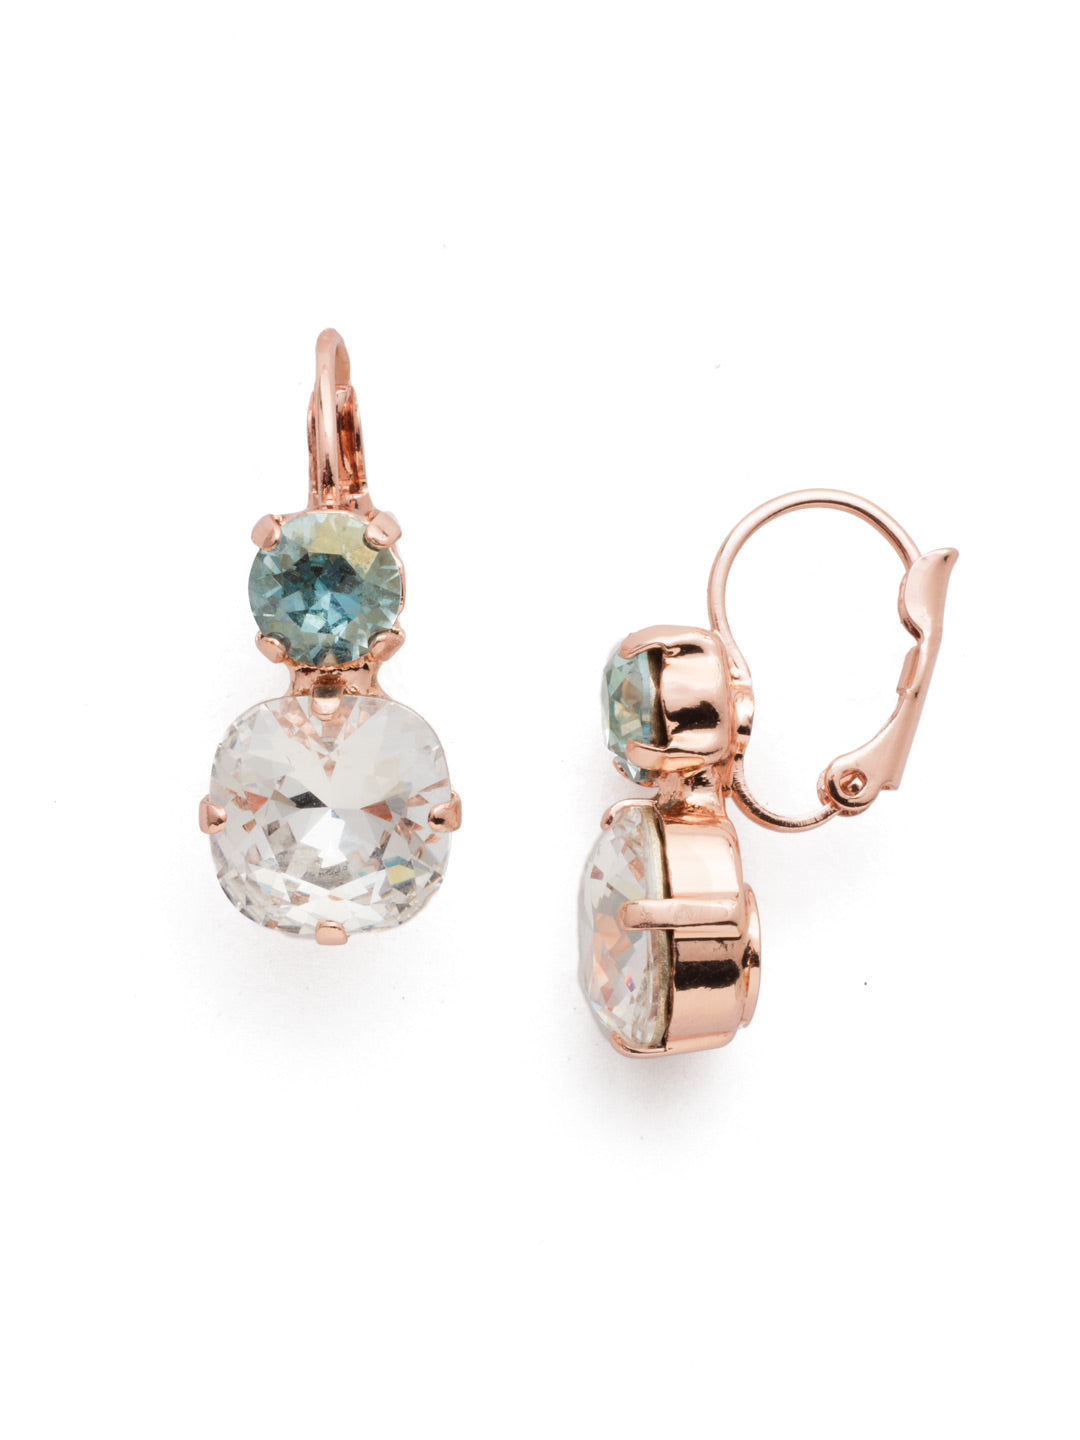 Roundabout Dangle Earring - EDH76RGCAZ - <p>A round crystals sits perfectly atop one a cushion cut stone. The perfect amount of sparkle for every day and any occasion. From Sorrelli's Crystal Azure collection in our Rose Gold-tone finish.</p>